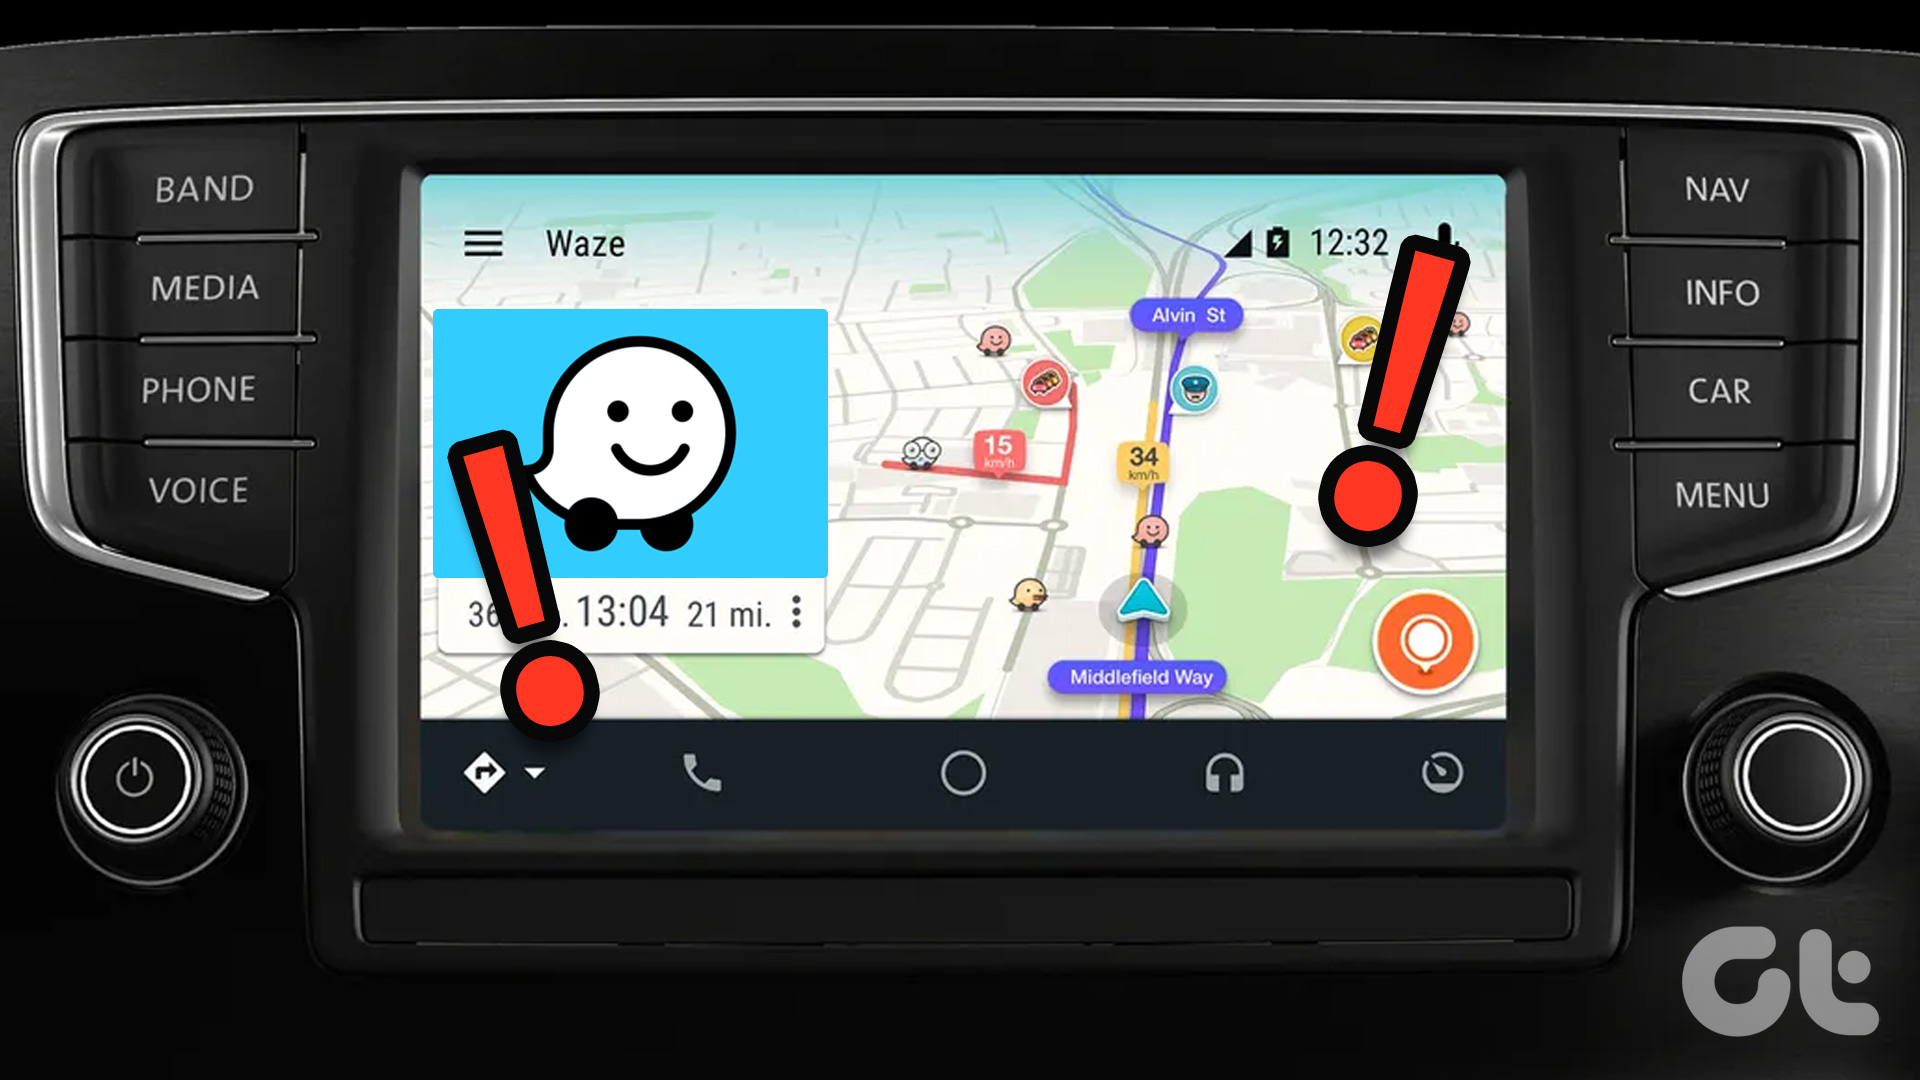 Fix Waze not working on Android Auto